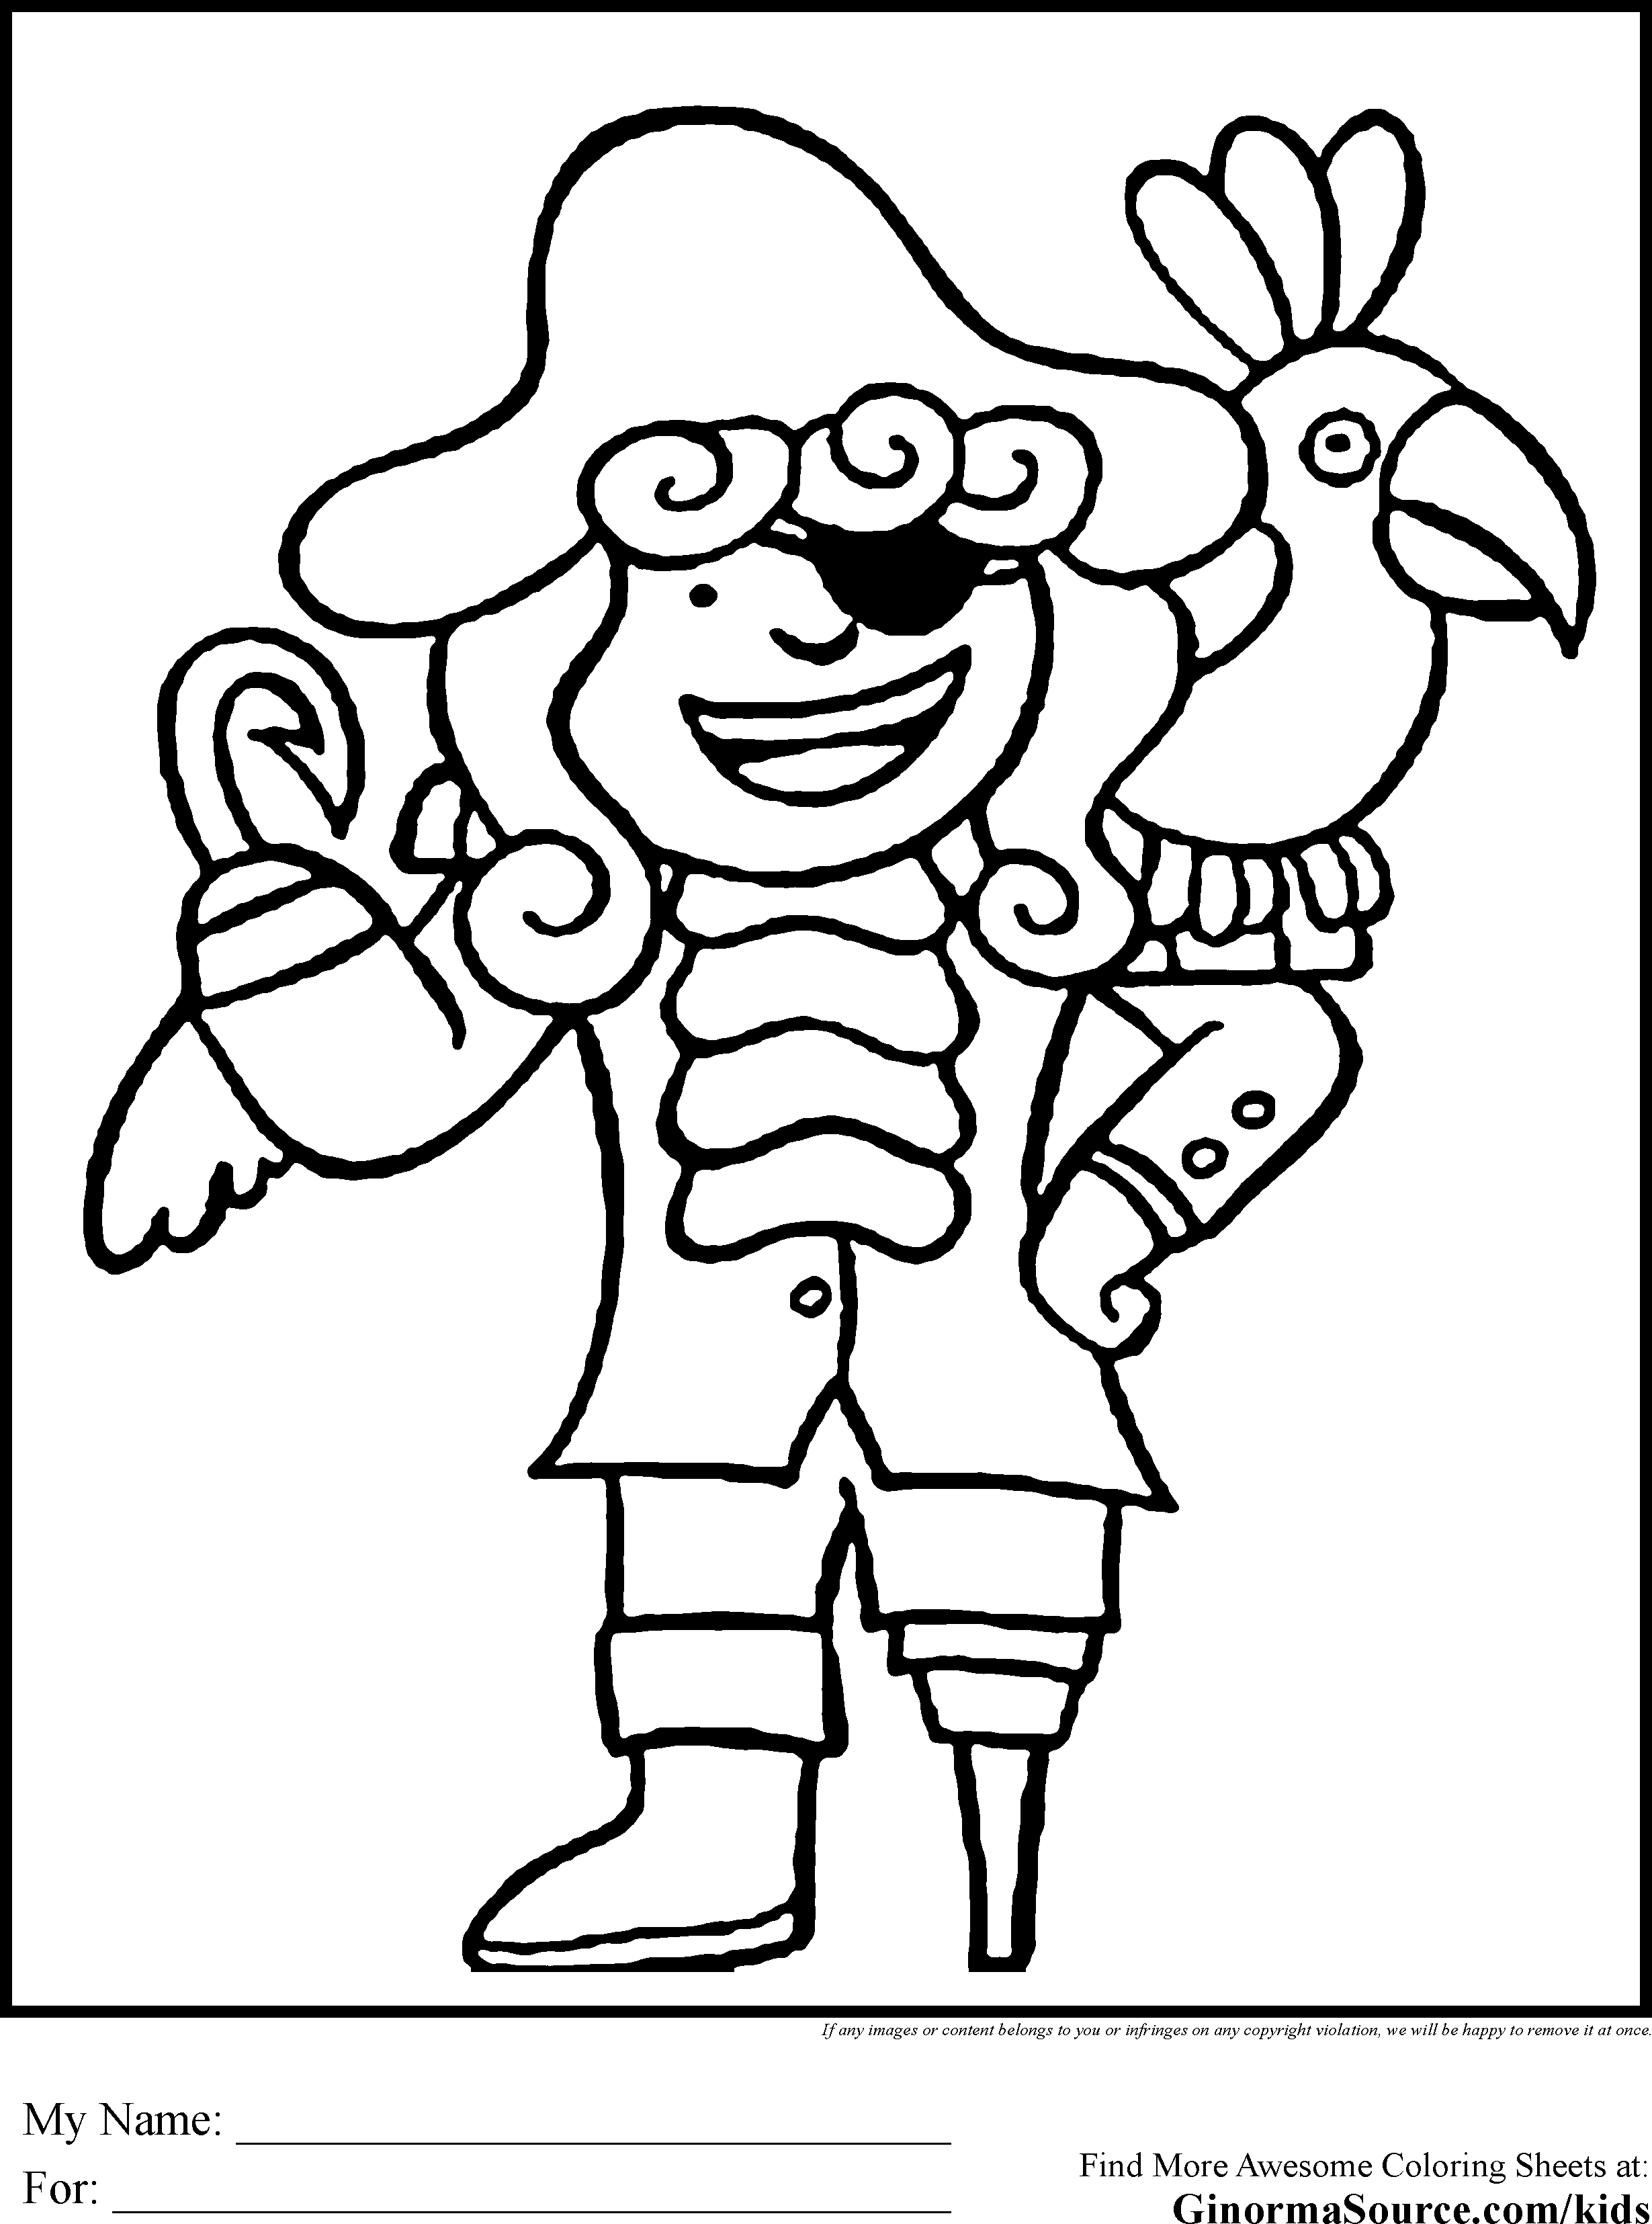 Printable Pirate Coloring Book | High Quality Coloring Pages